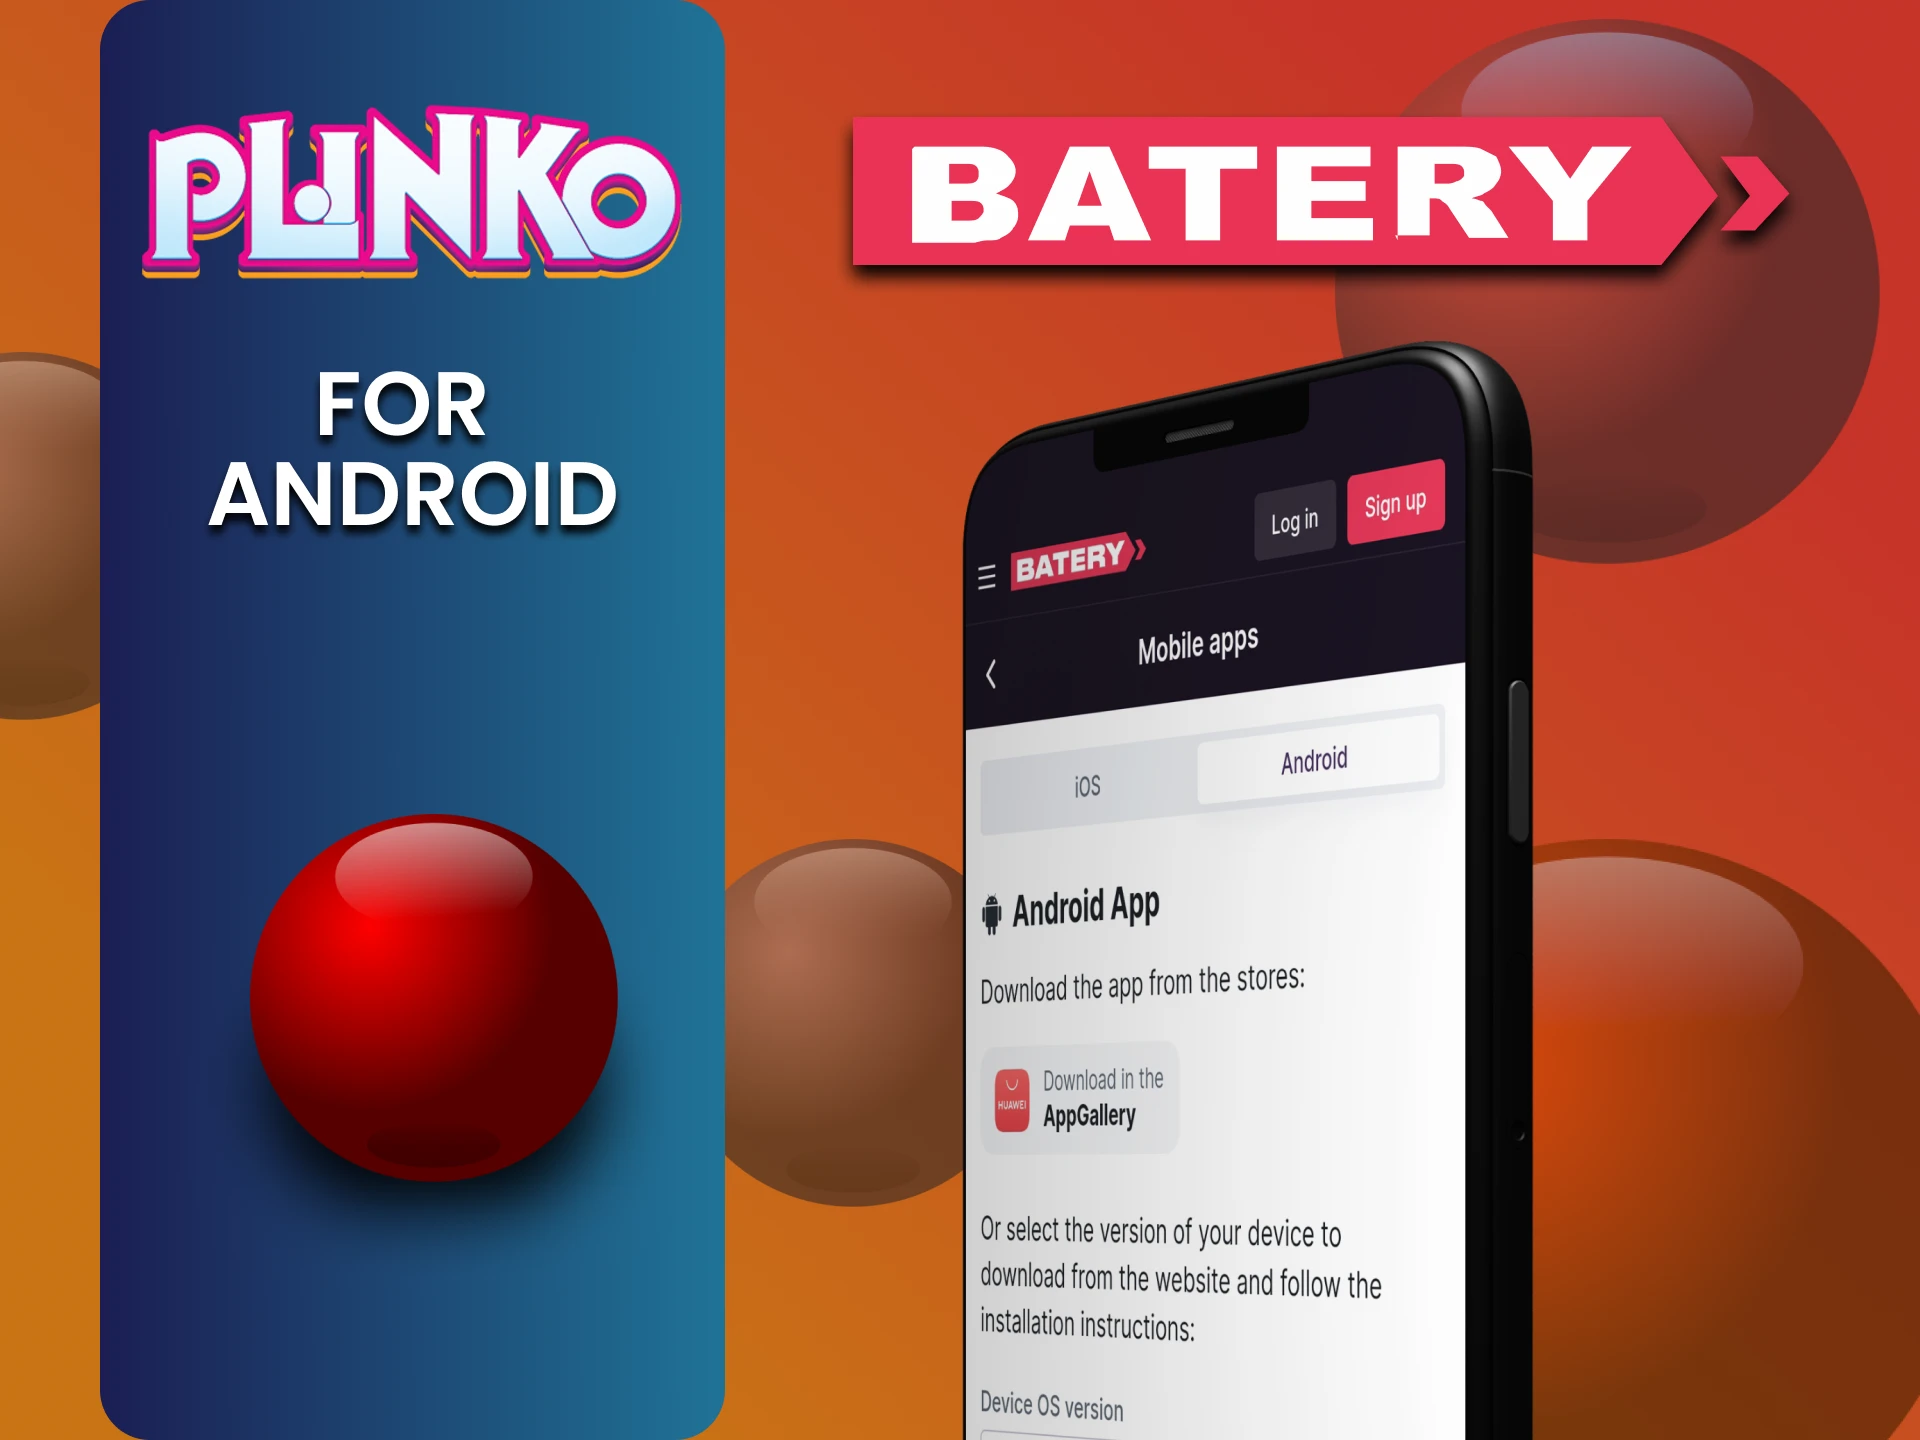 Install the Batery app on Android to play Plinko.